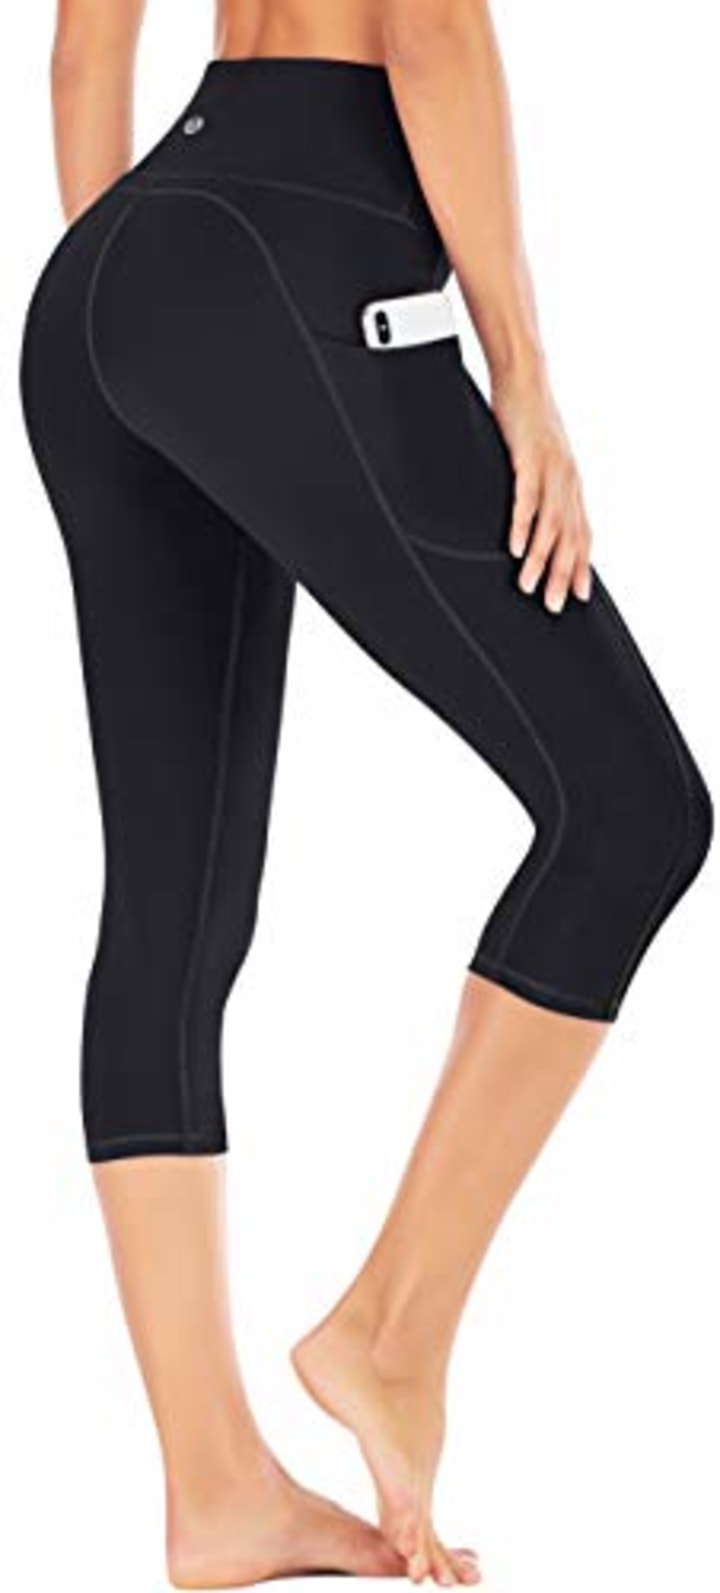 Buy JUST RIDER Yoga Pants with Pockets High Waisted  Workout Pants   Womens Performance Pant  Casual Jegging Pant  Stretchable Jeggings  Track Pants for Girls  Women S Black at Amazonin